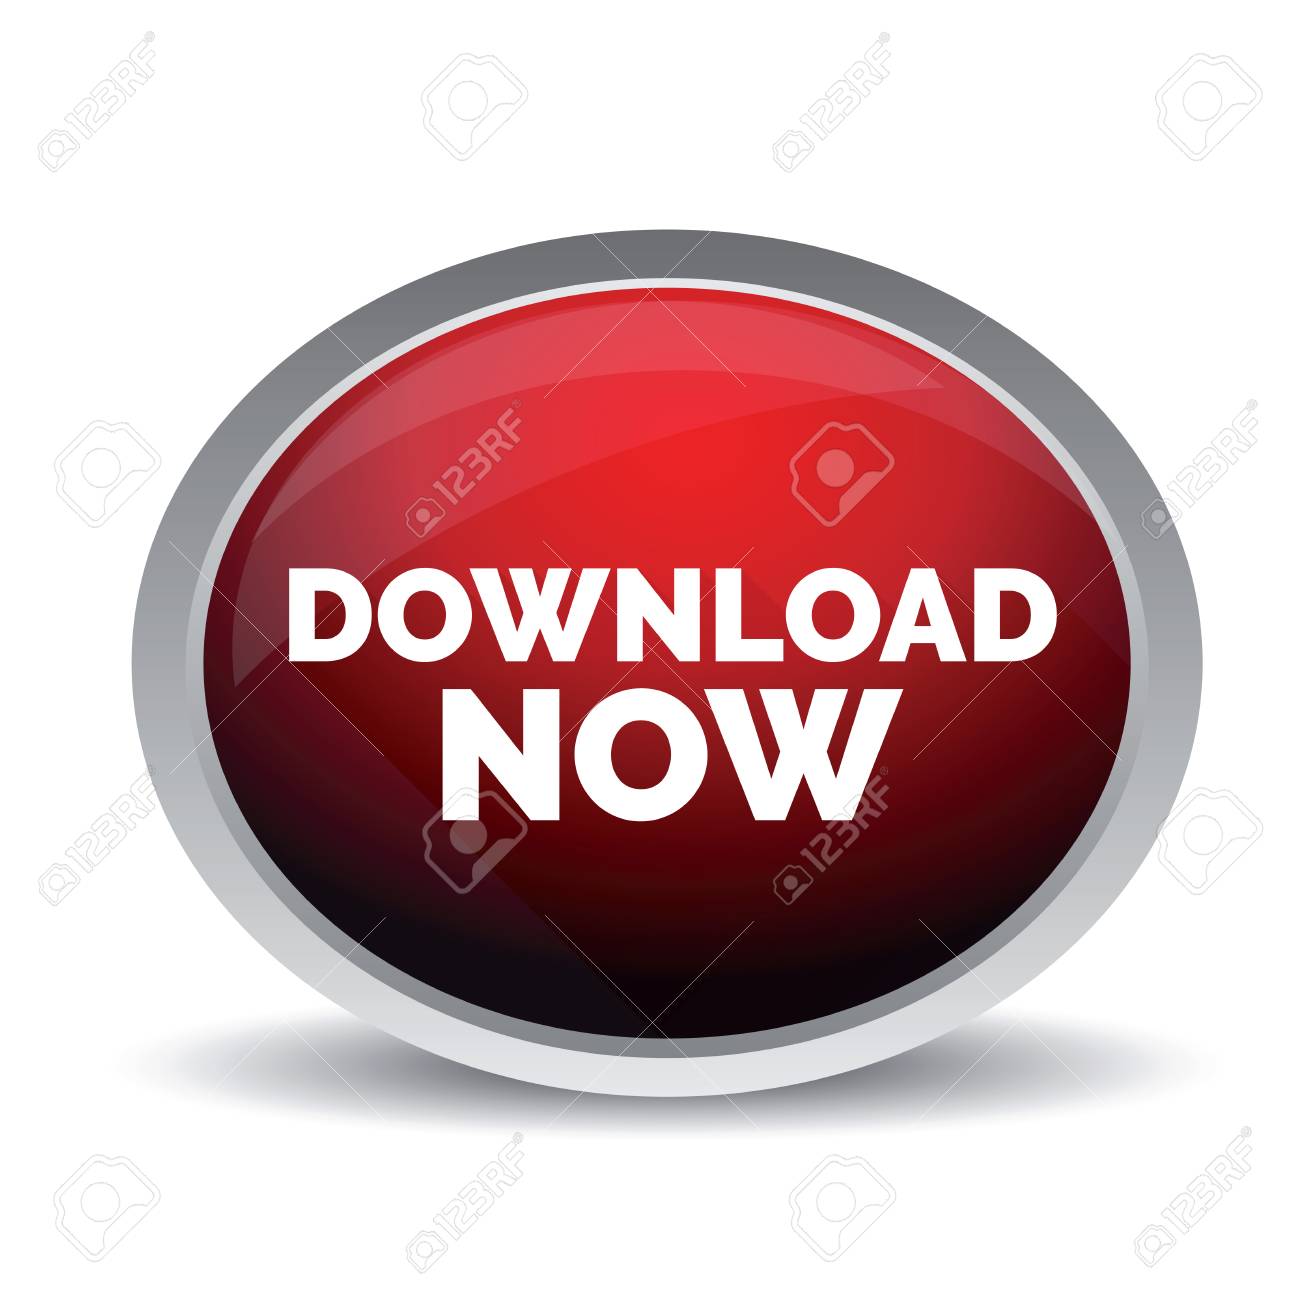 Download now button Stock Vector - 40544234